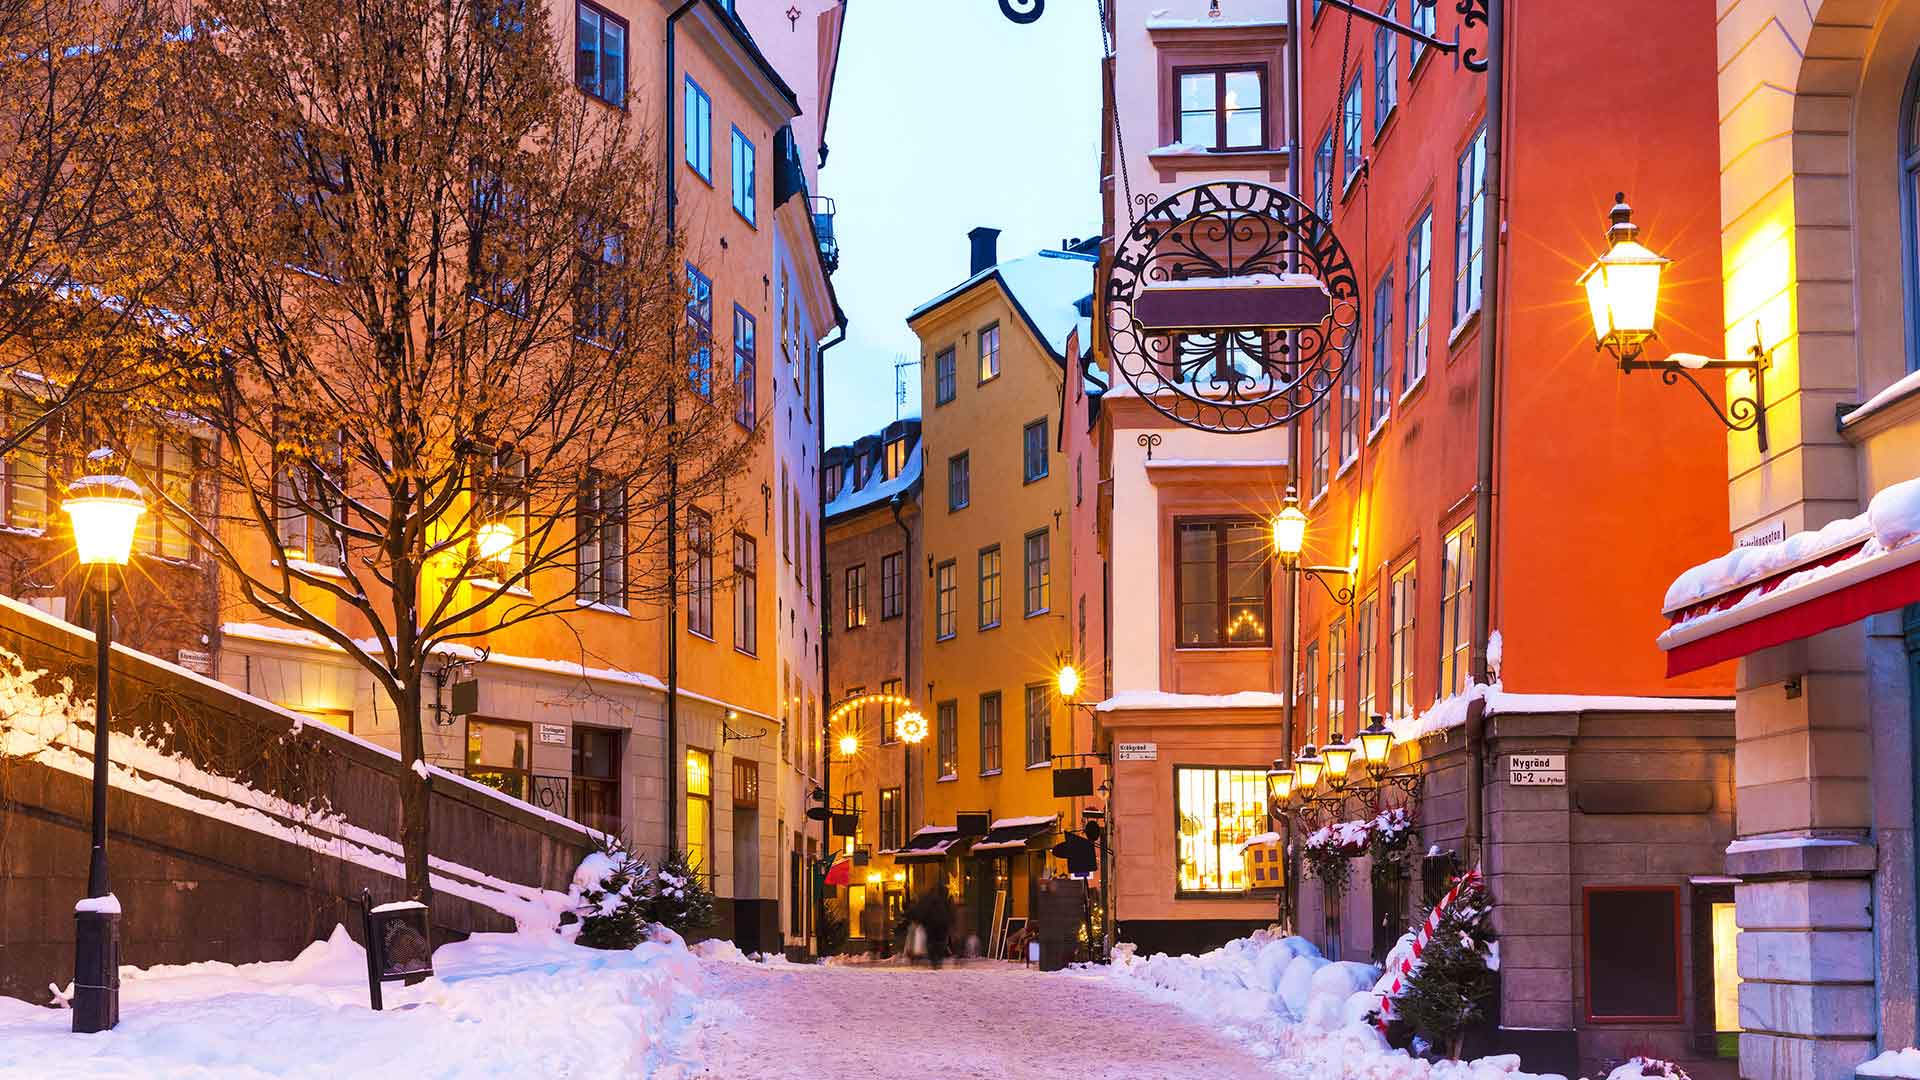 The streets of Stockholm’s Gamla Stan in winter